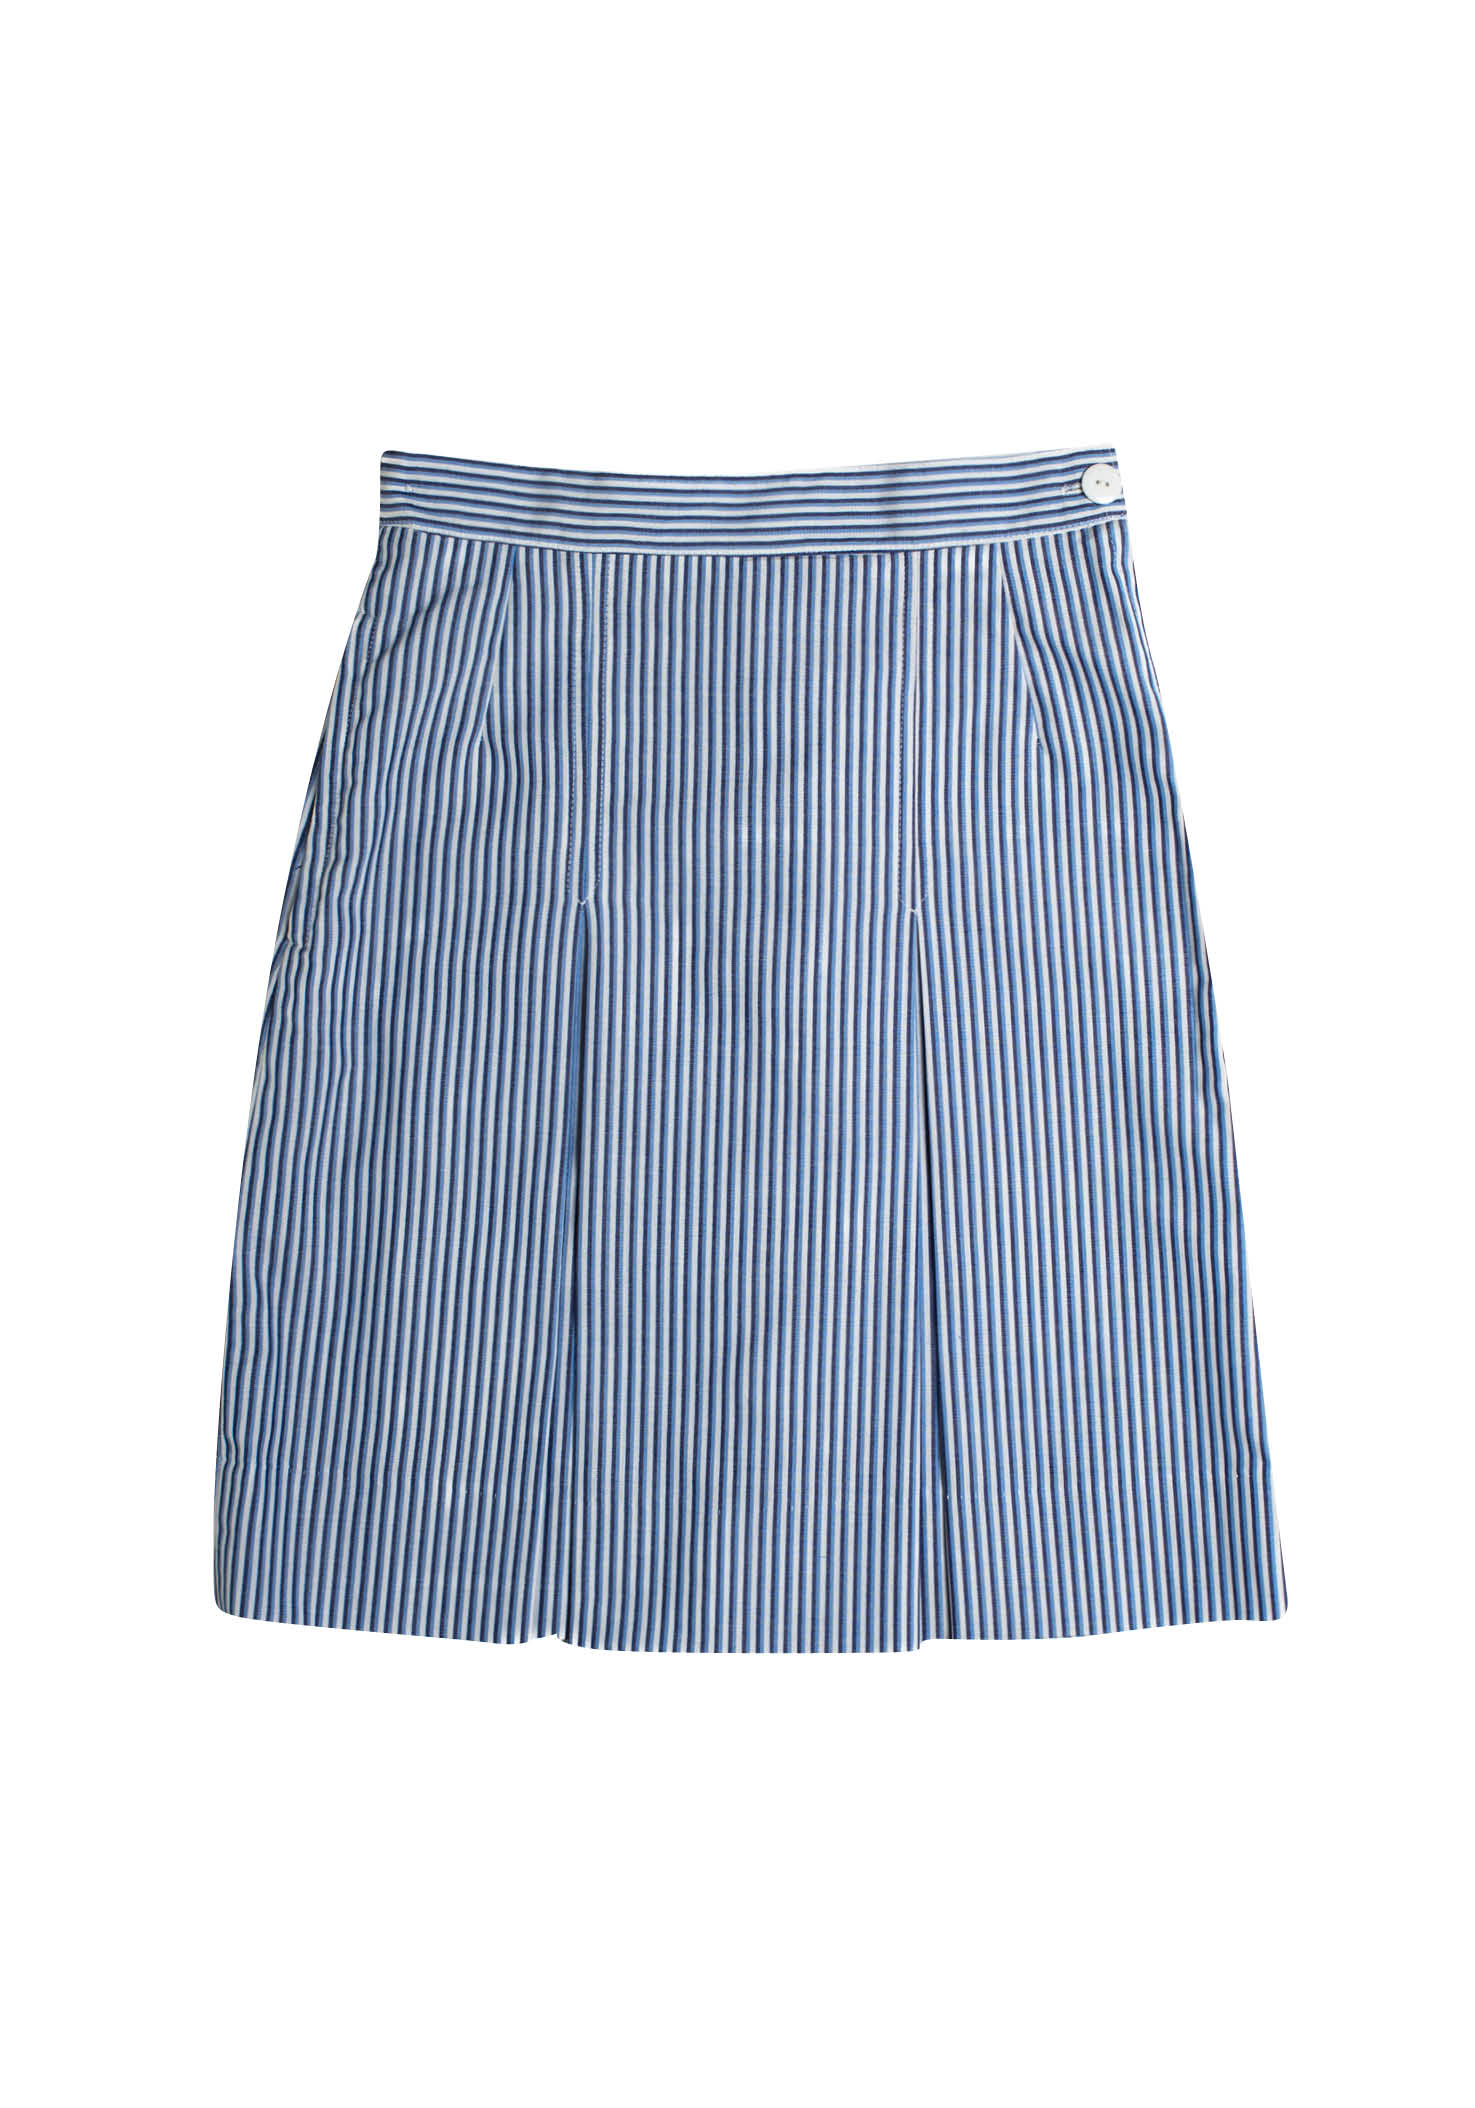 Manly Selective Girls Summer Skirt | Shop at Pickles Schoolwear ...